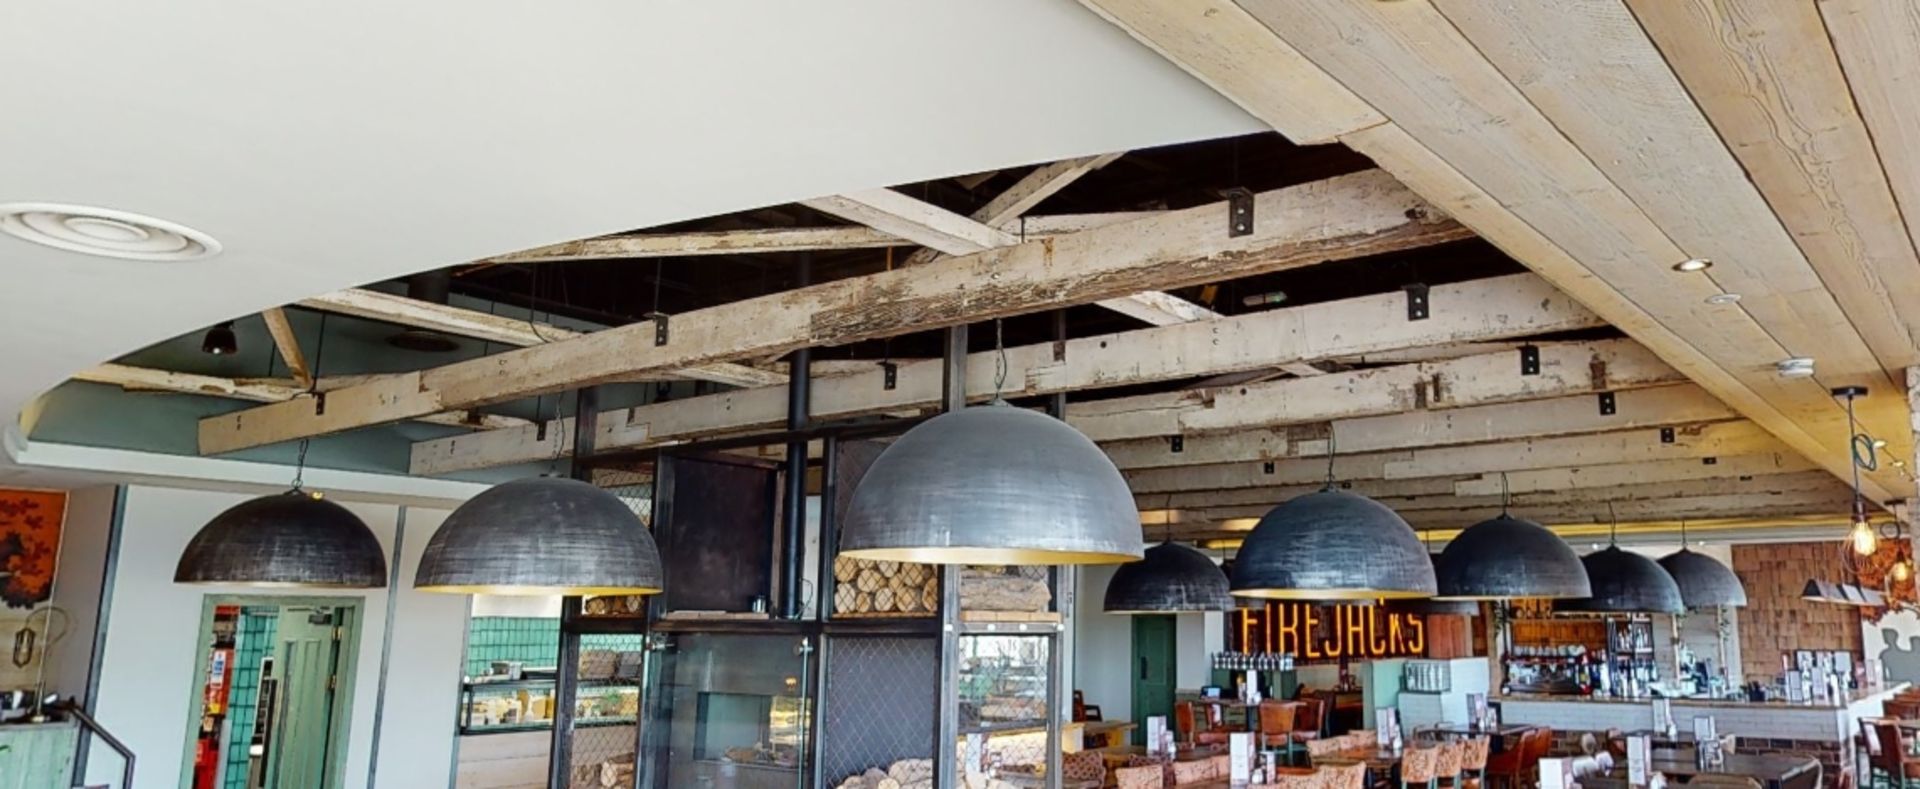 9 x Suspended Wooden Ceiling Beams With Fixing Beams - Rustic Farmhouse Style - 23 Feet in Length - Image 5 of 6